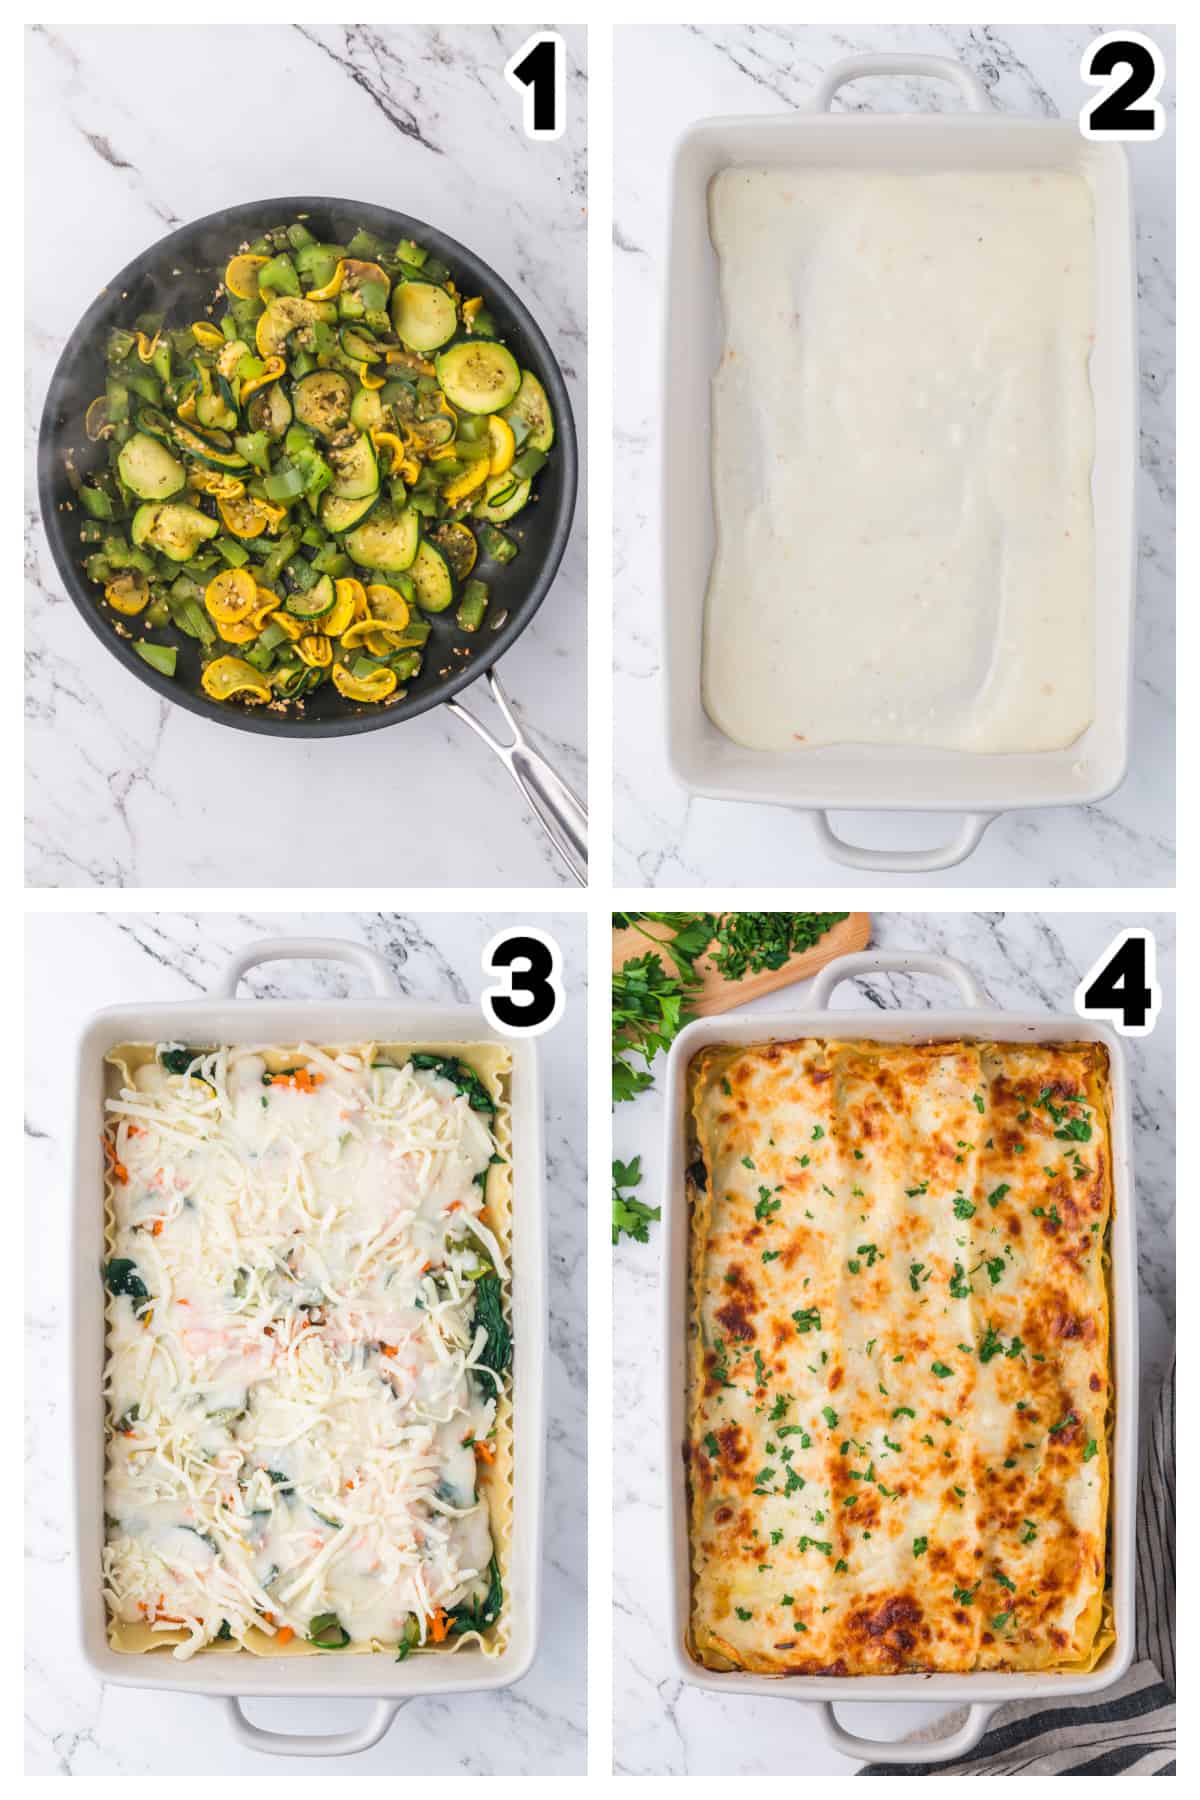 Collage showing how to make vegetable lasagna.